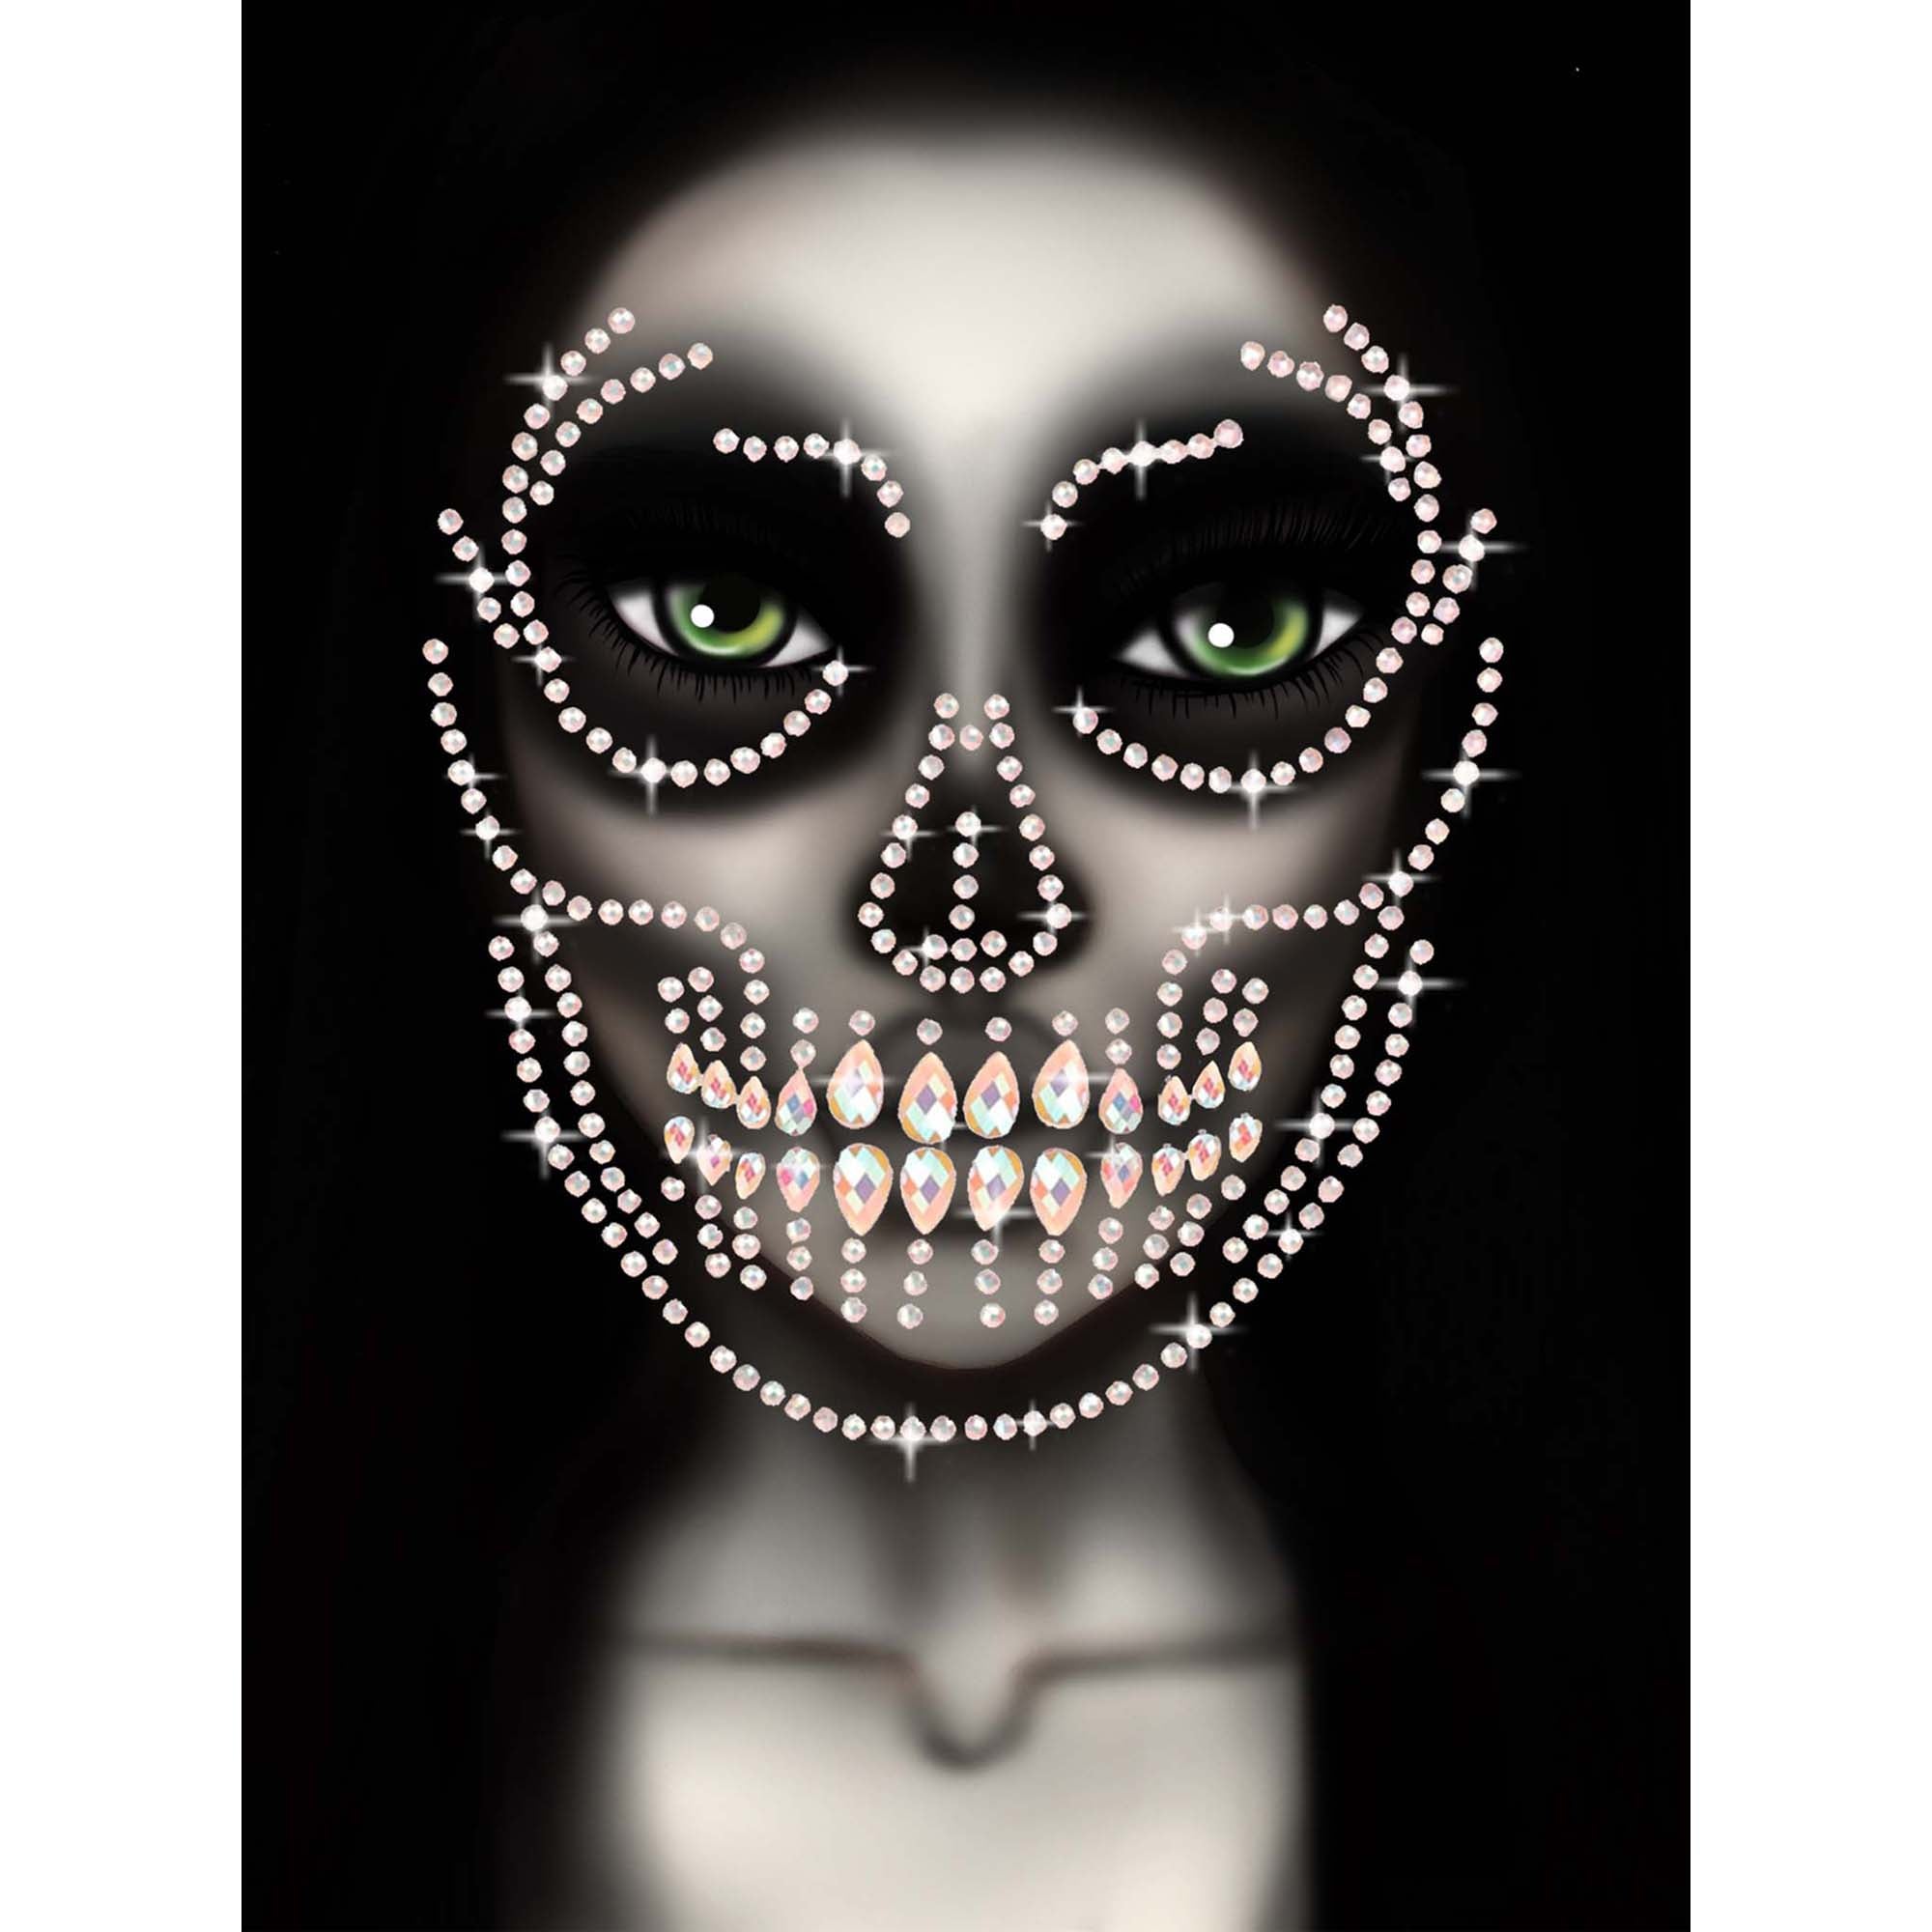 Glow-in-the-Dark Skull Adhesive Face Jewels, 1 Count